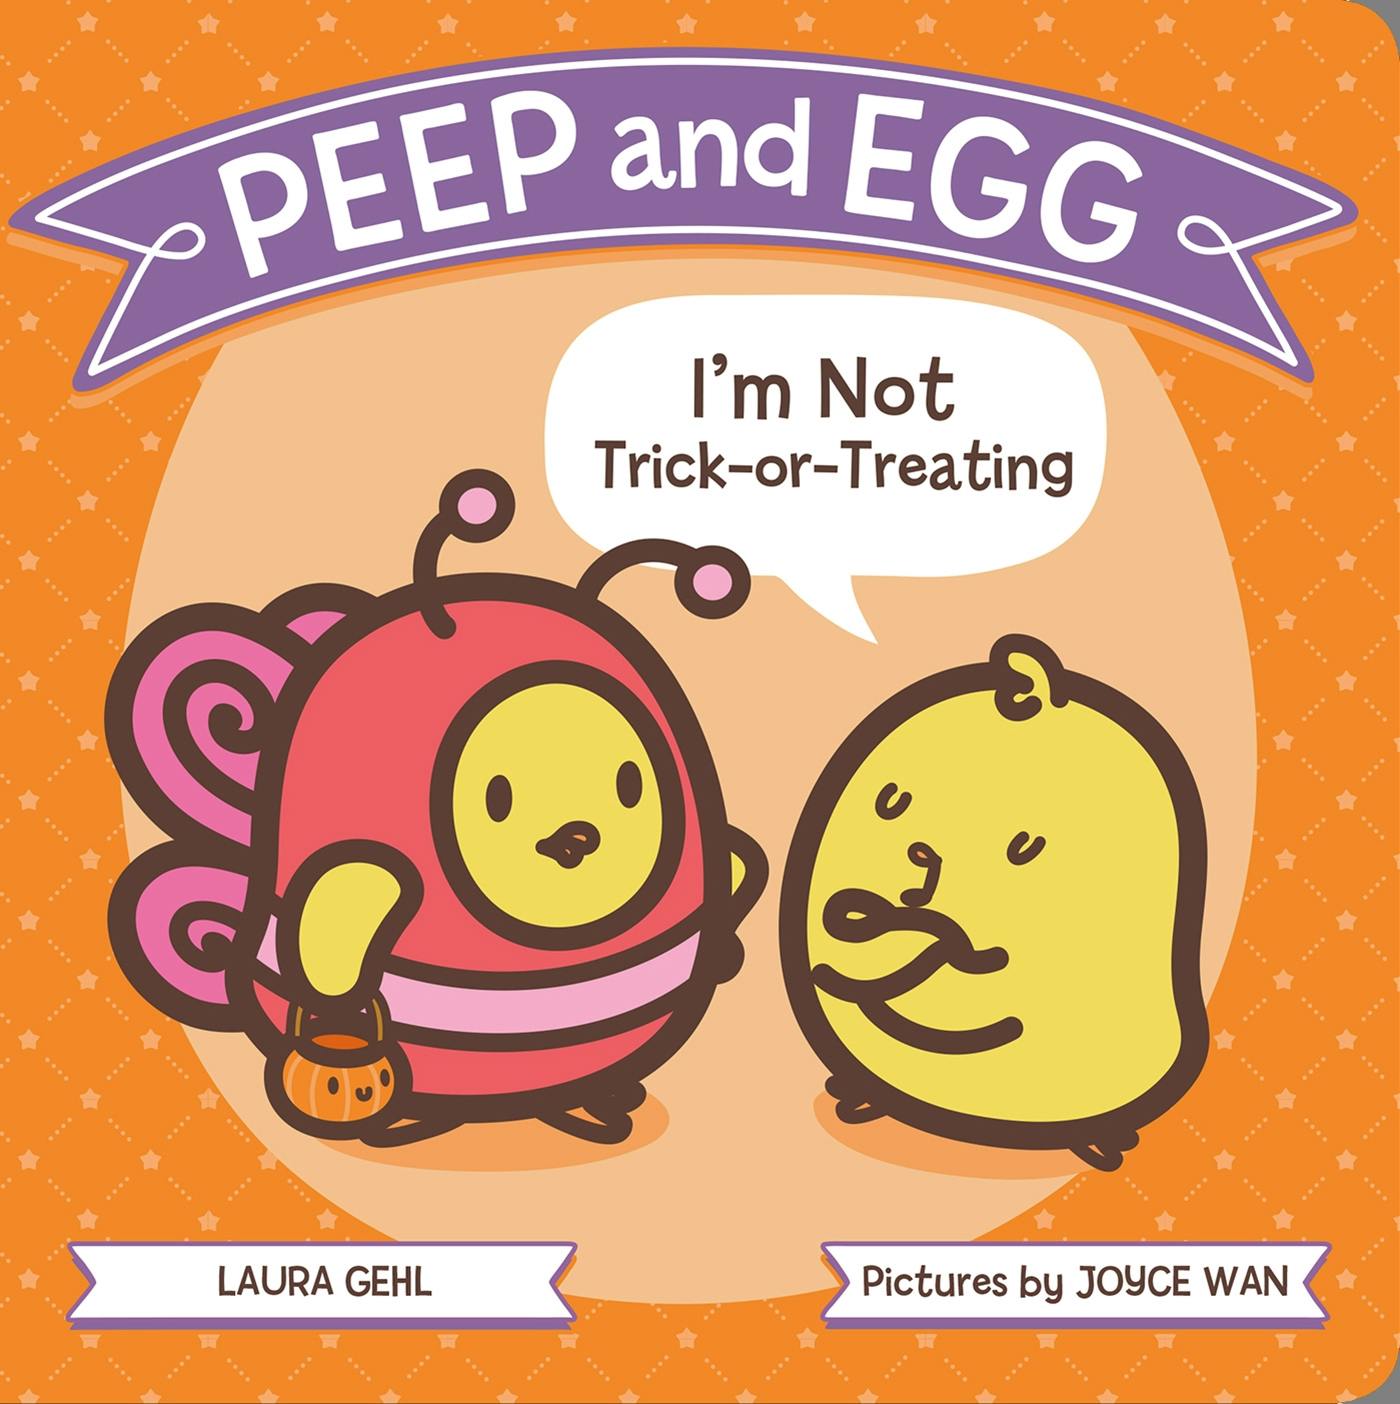 Image of Peep and Egg: I'm Not Trick-or-Treating